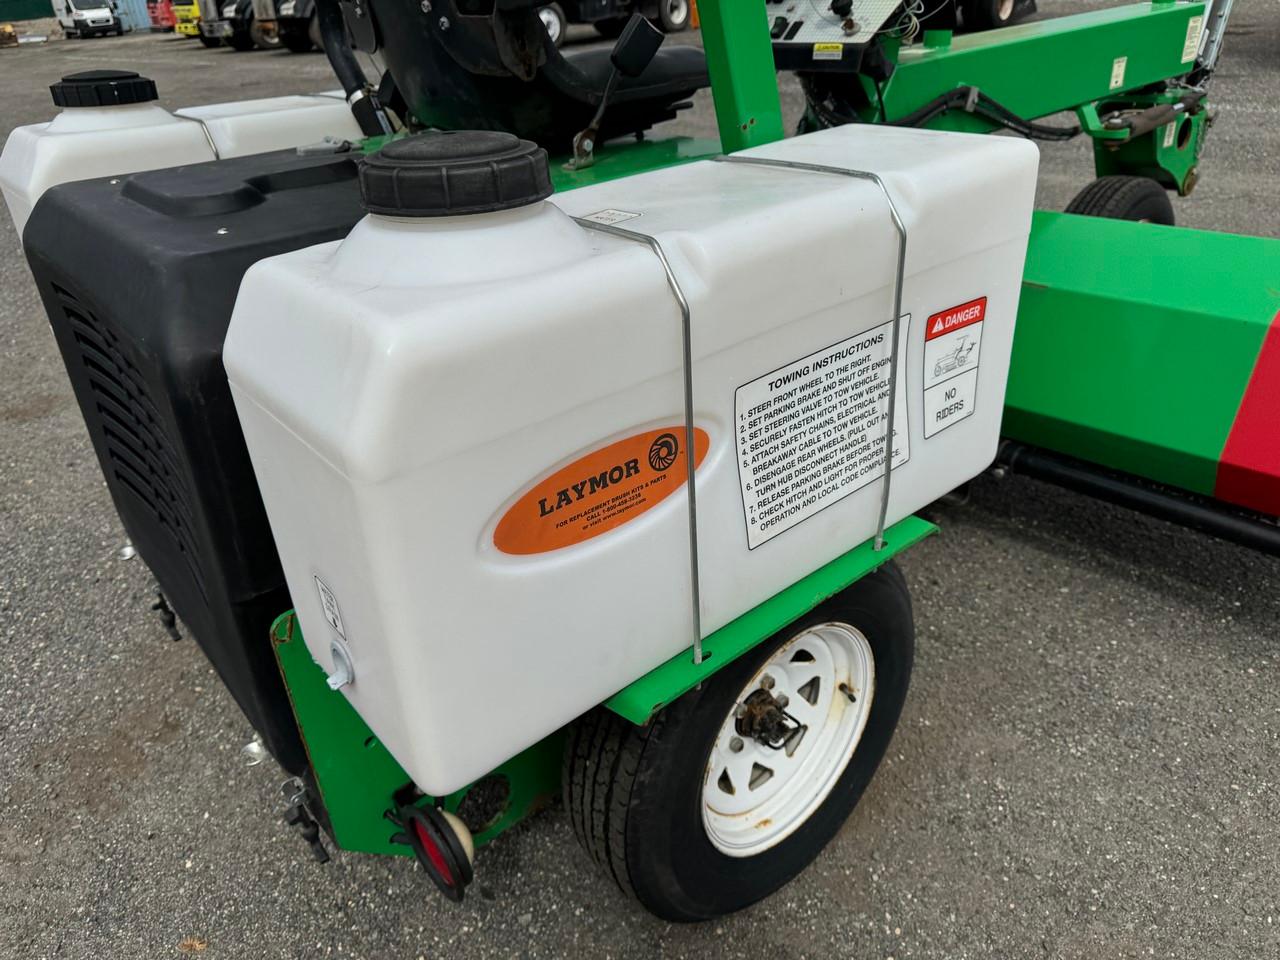 LAY-MOR SM 300 Sweeper